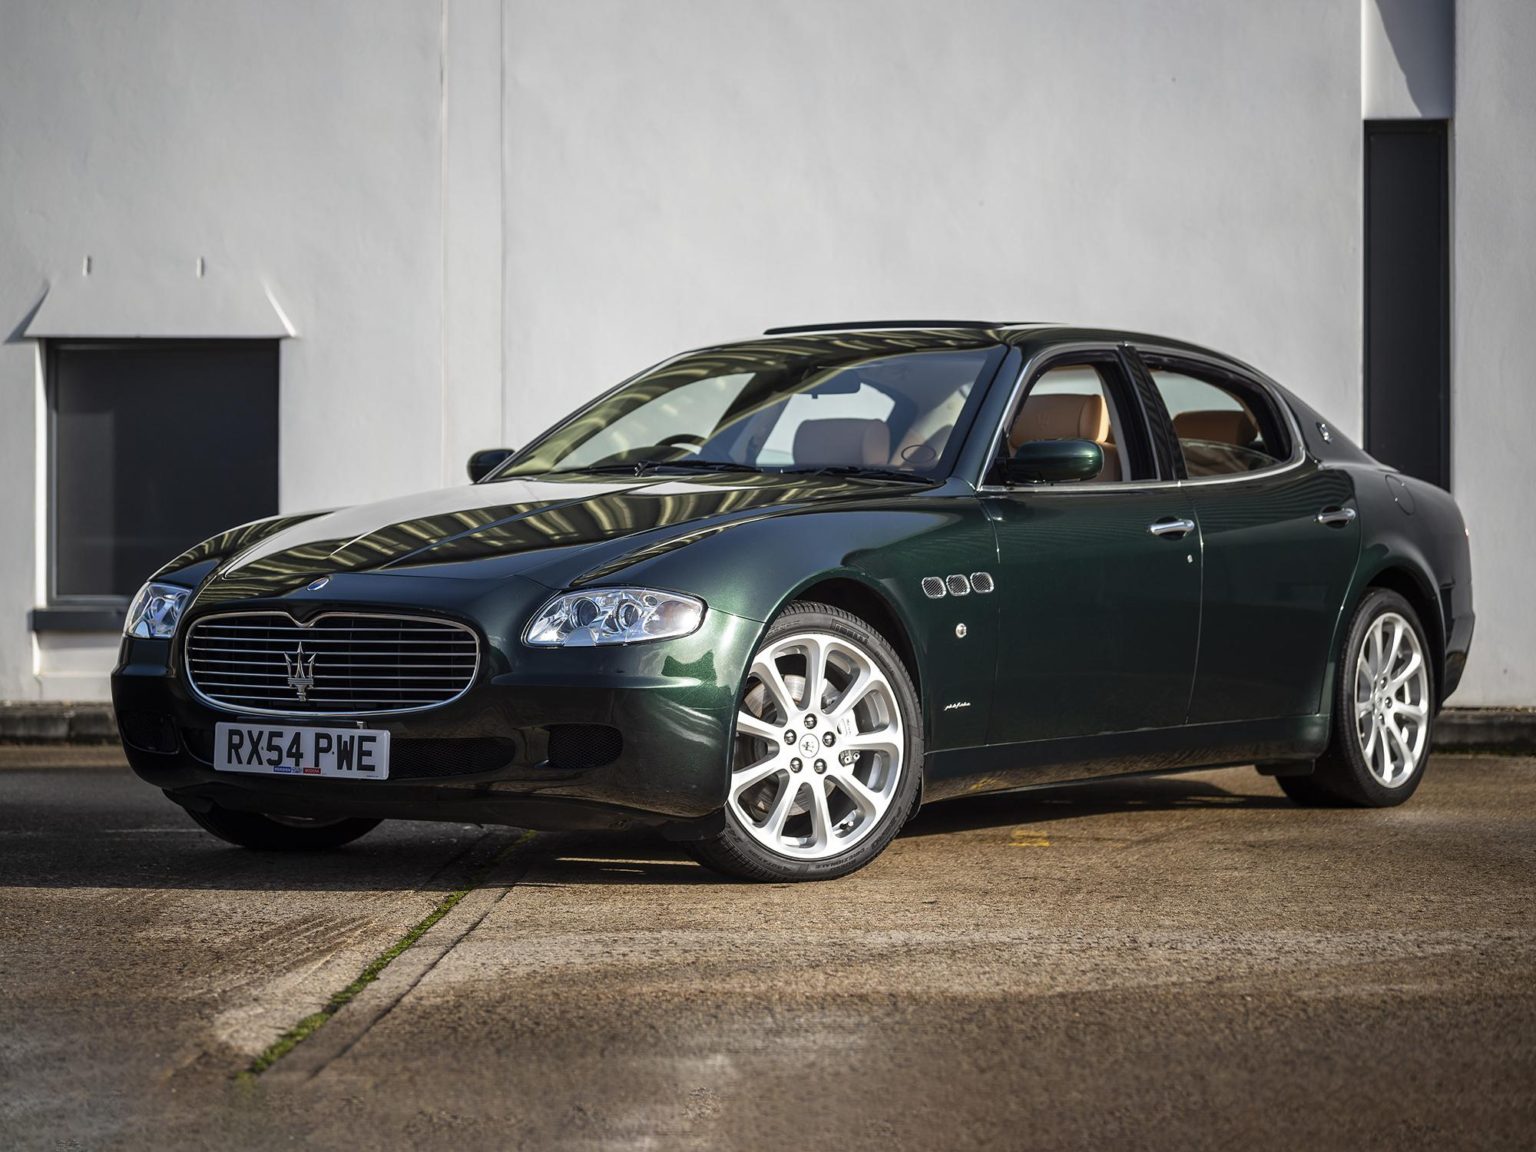 Sir Elton John's 2025 Maserati Quattroporte is up for auction this month.